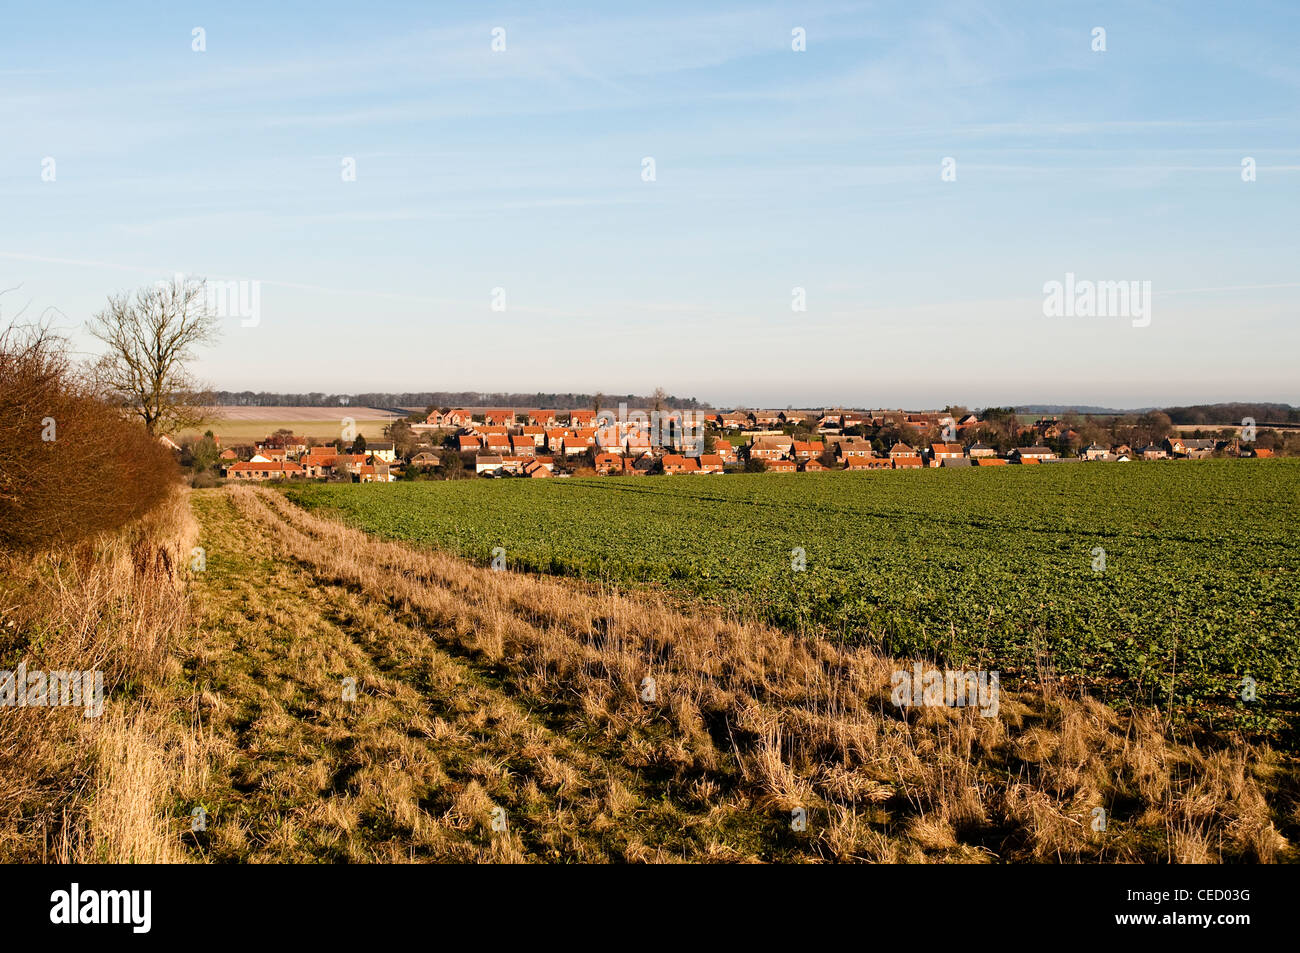 Rooftops of Sedgeford and agricultural field in the foreground, Norfolk, England, UK Stock Photo